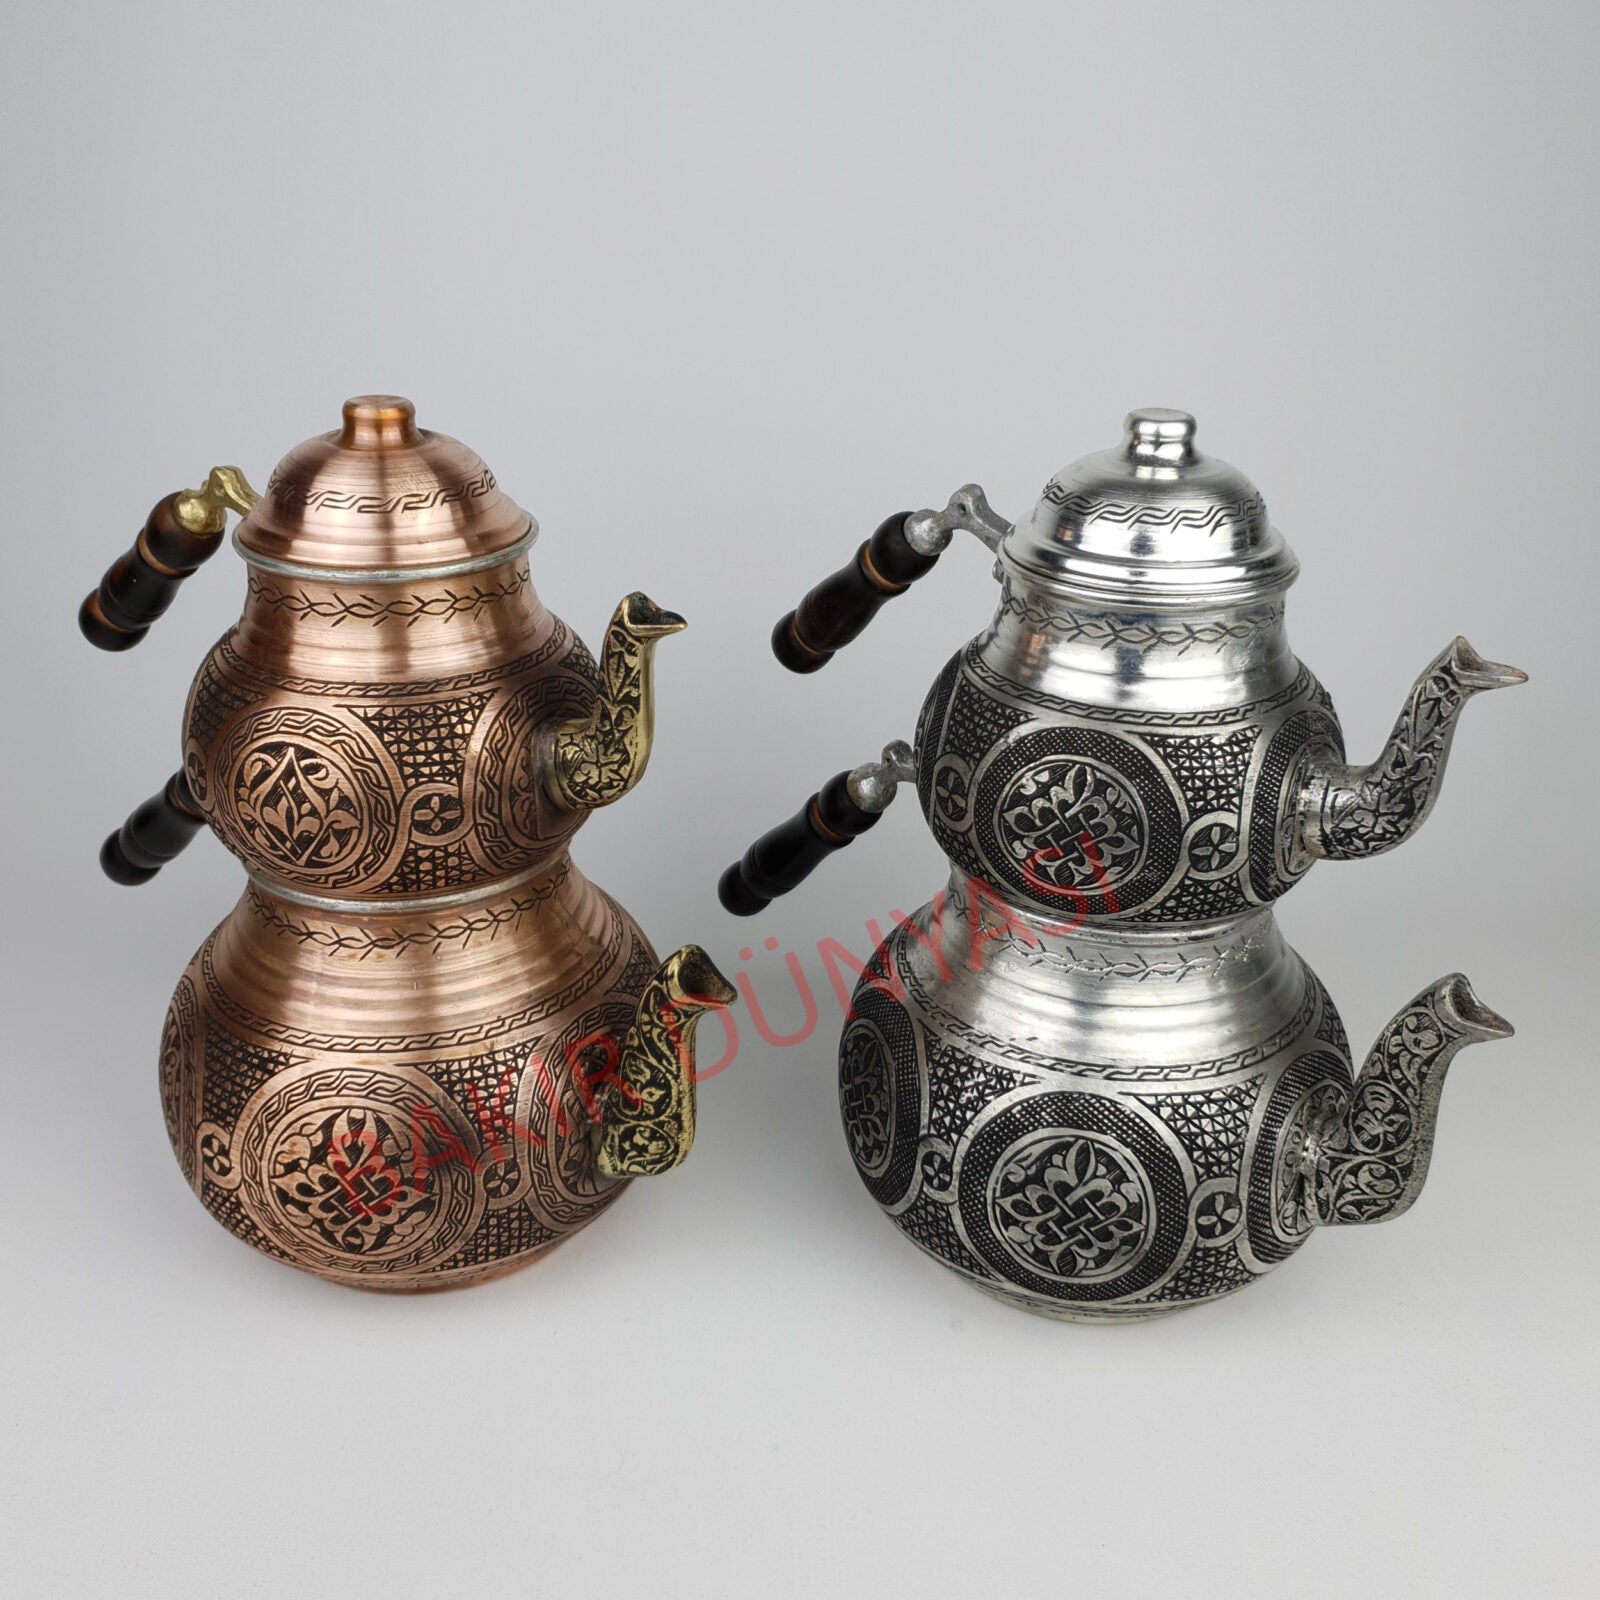 Very Heavy Embroidered Thick Copper Teapot